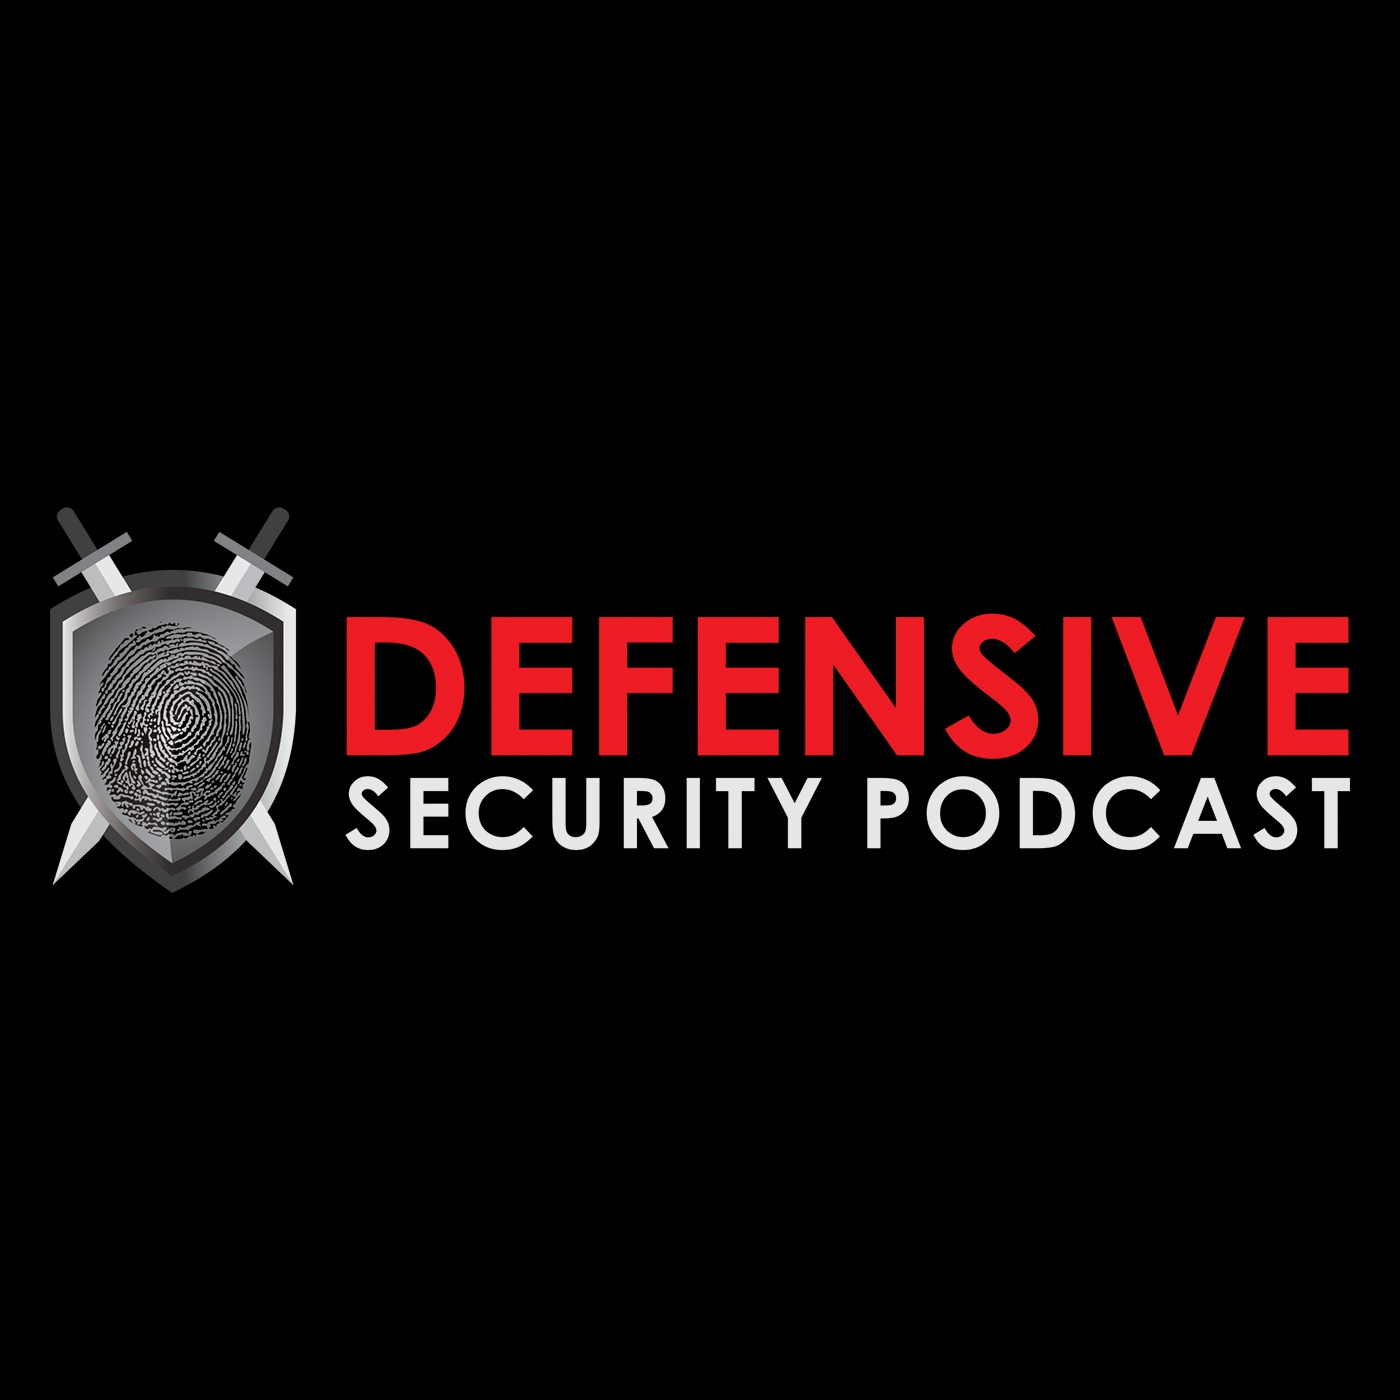 Defensive Security Podcast - Malware, Hacking, Cyber Security & Infosec